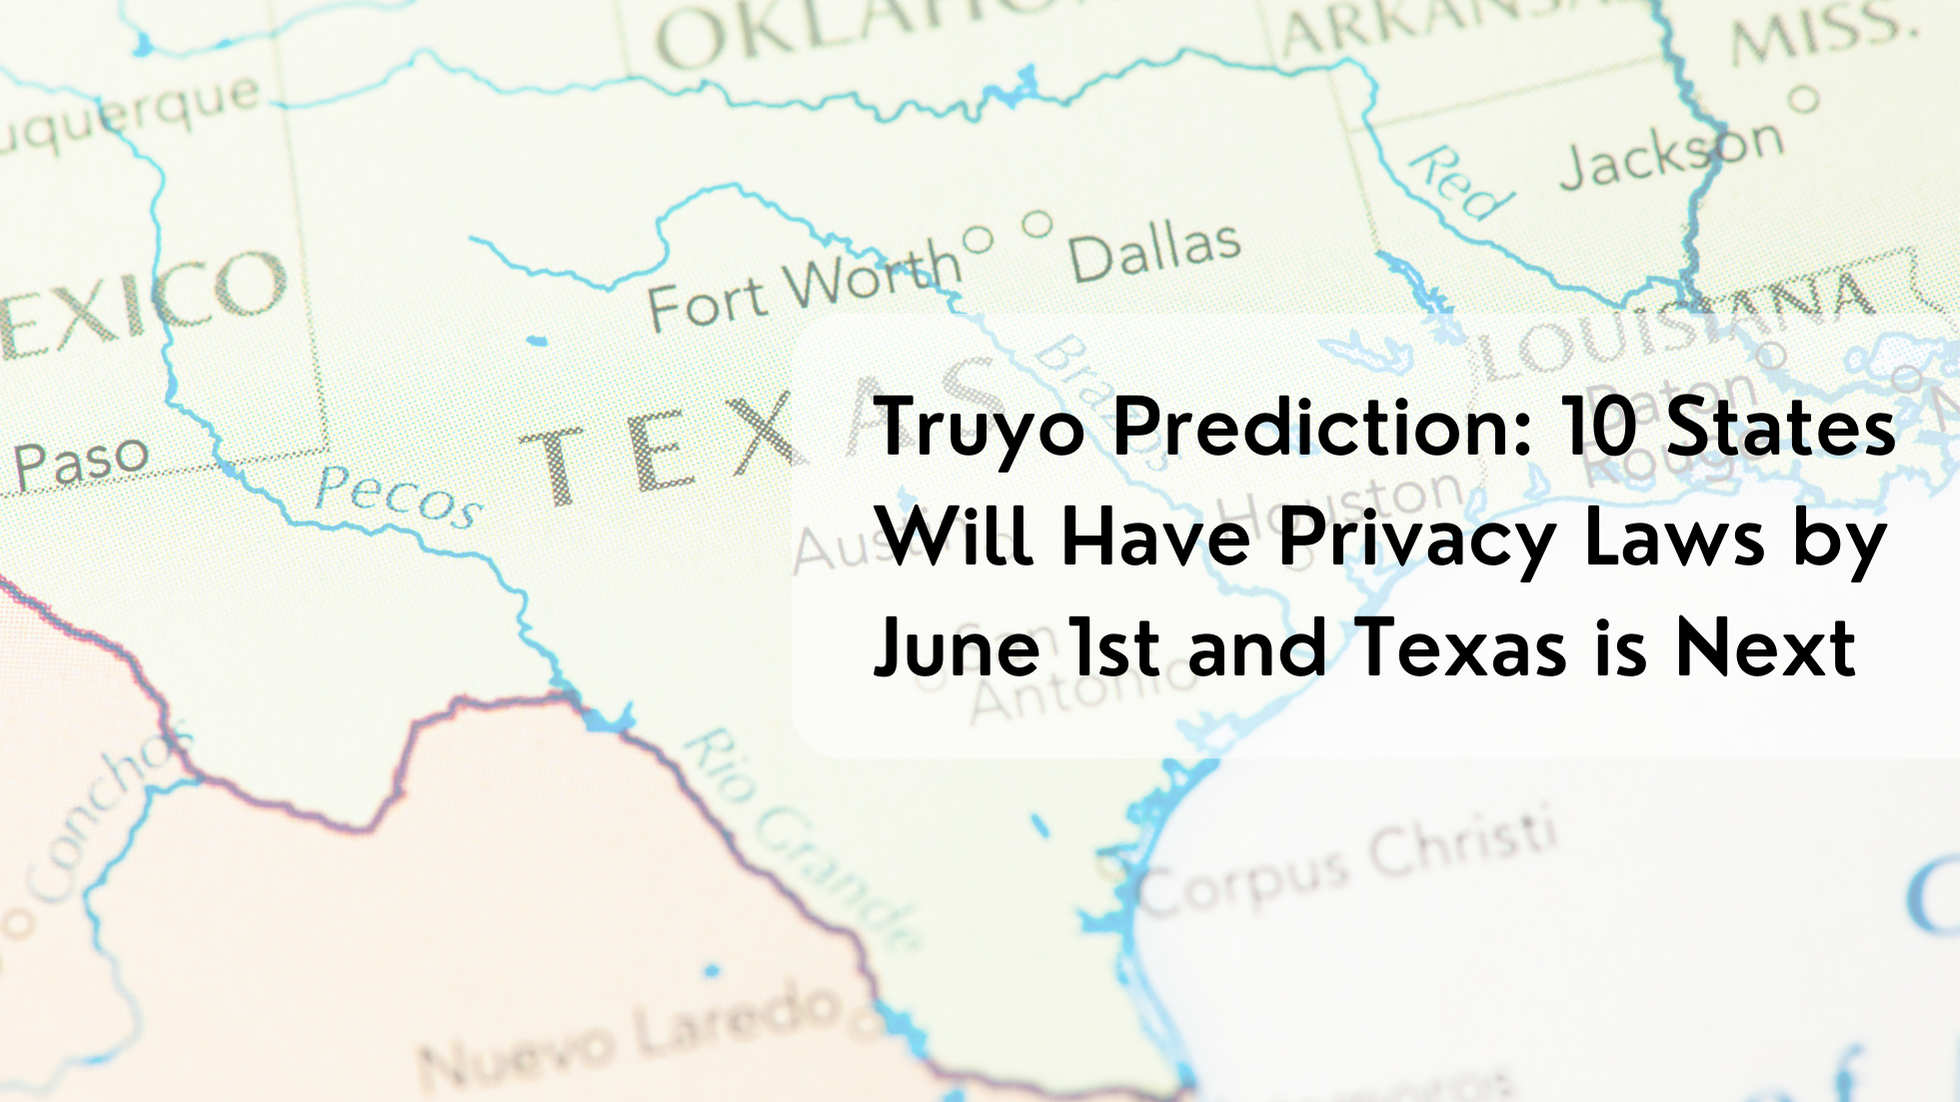 Texas Next to Pass Privacy Law